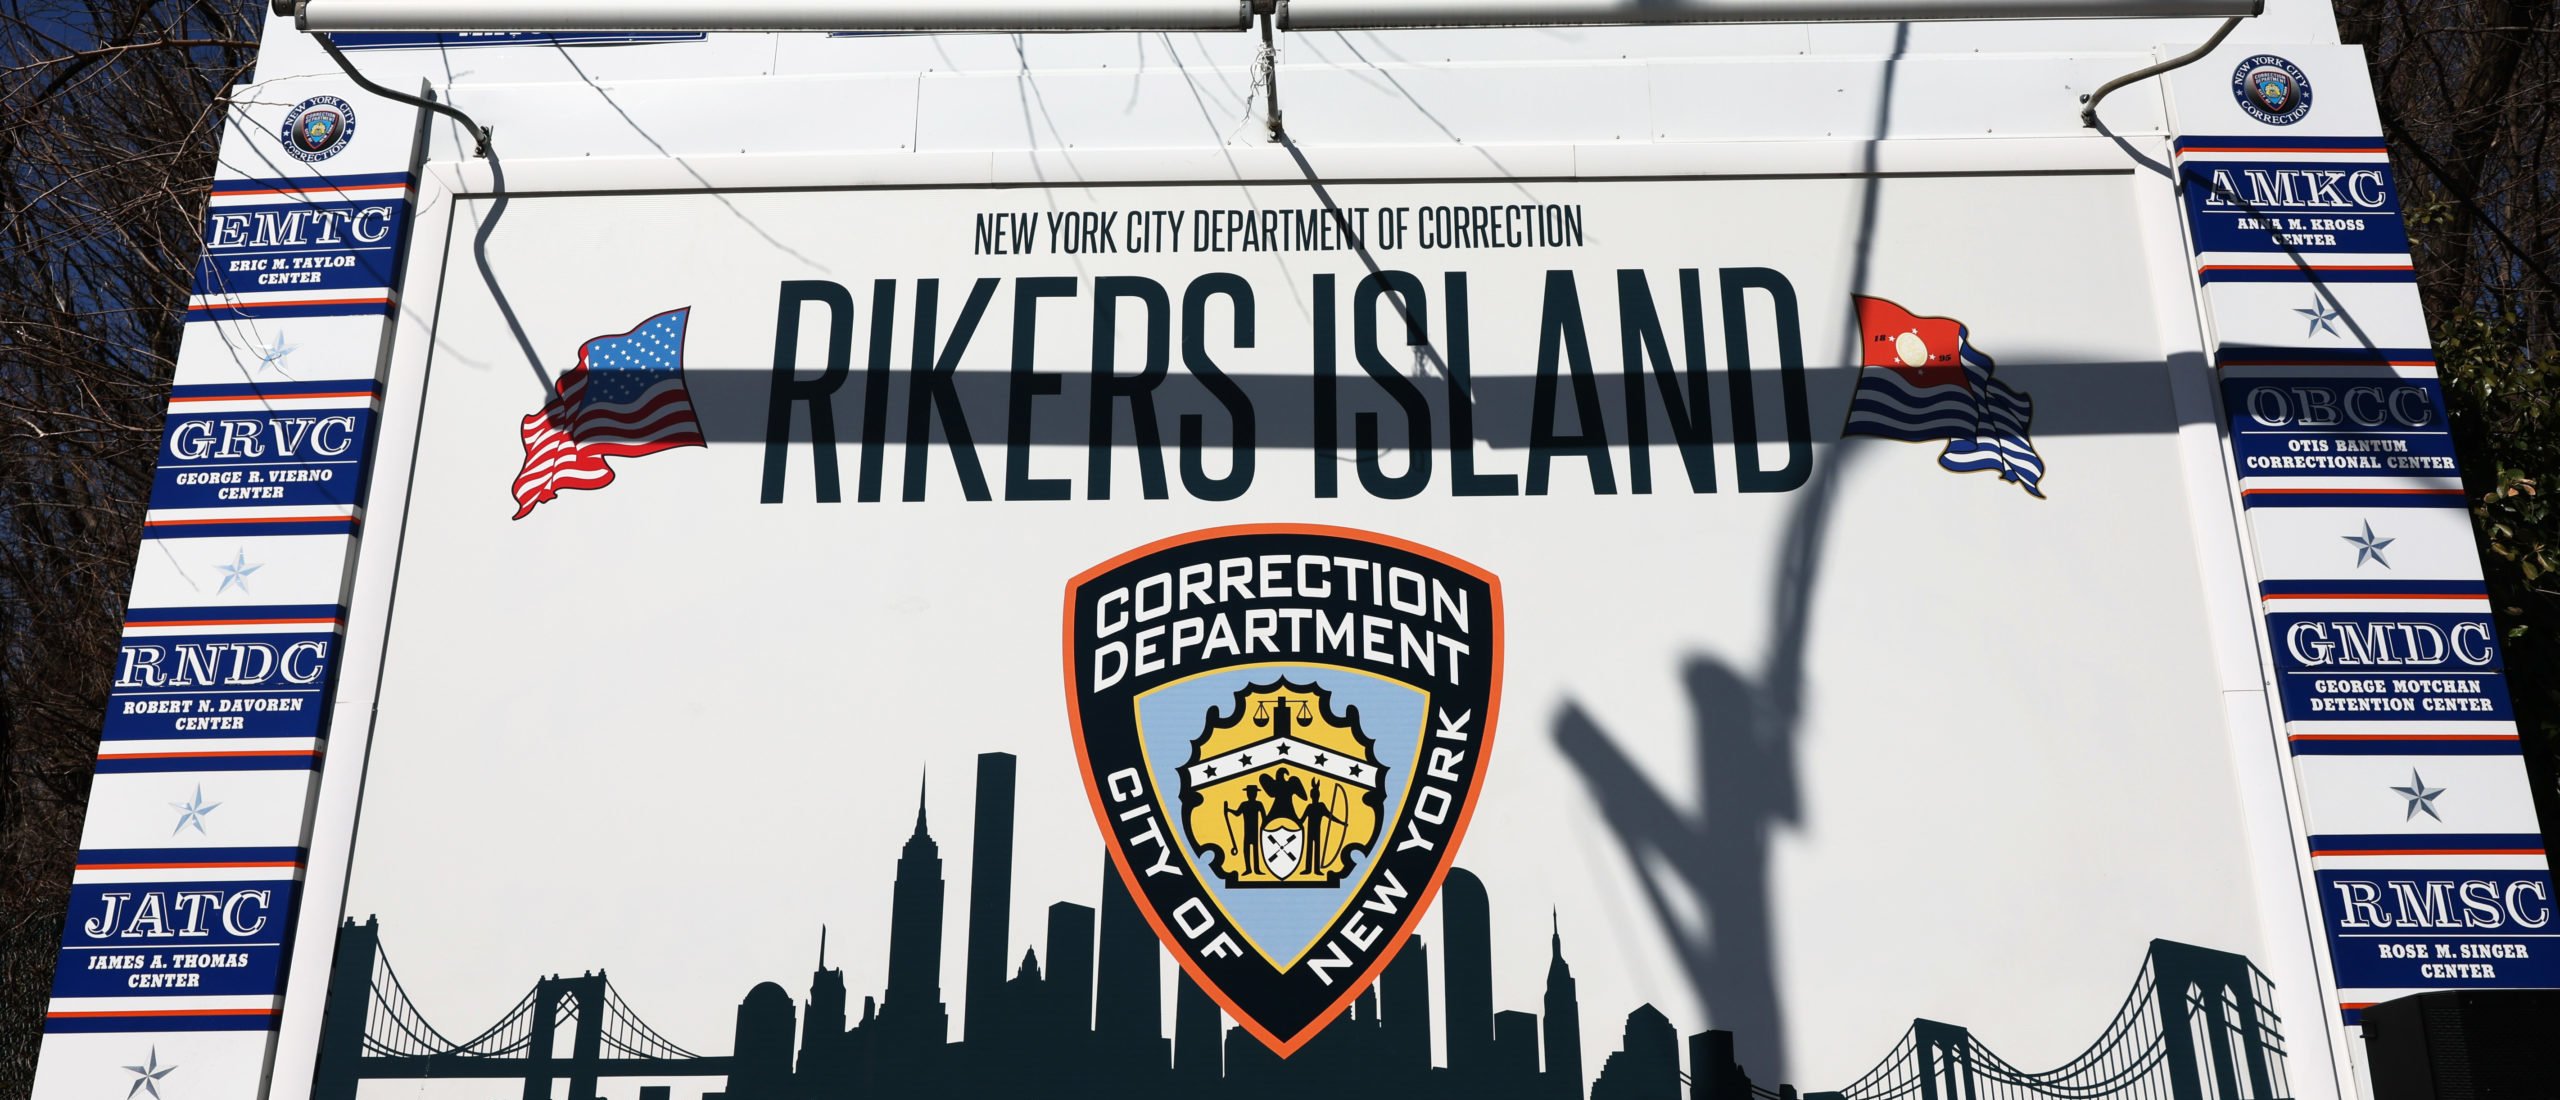 ‘Sanctuary’ Church Reportedly Pays $15,000 To Free Migrant From Rikers Island